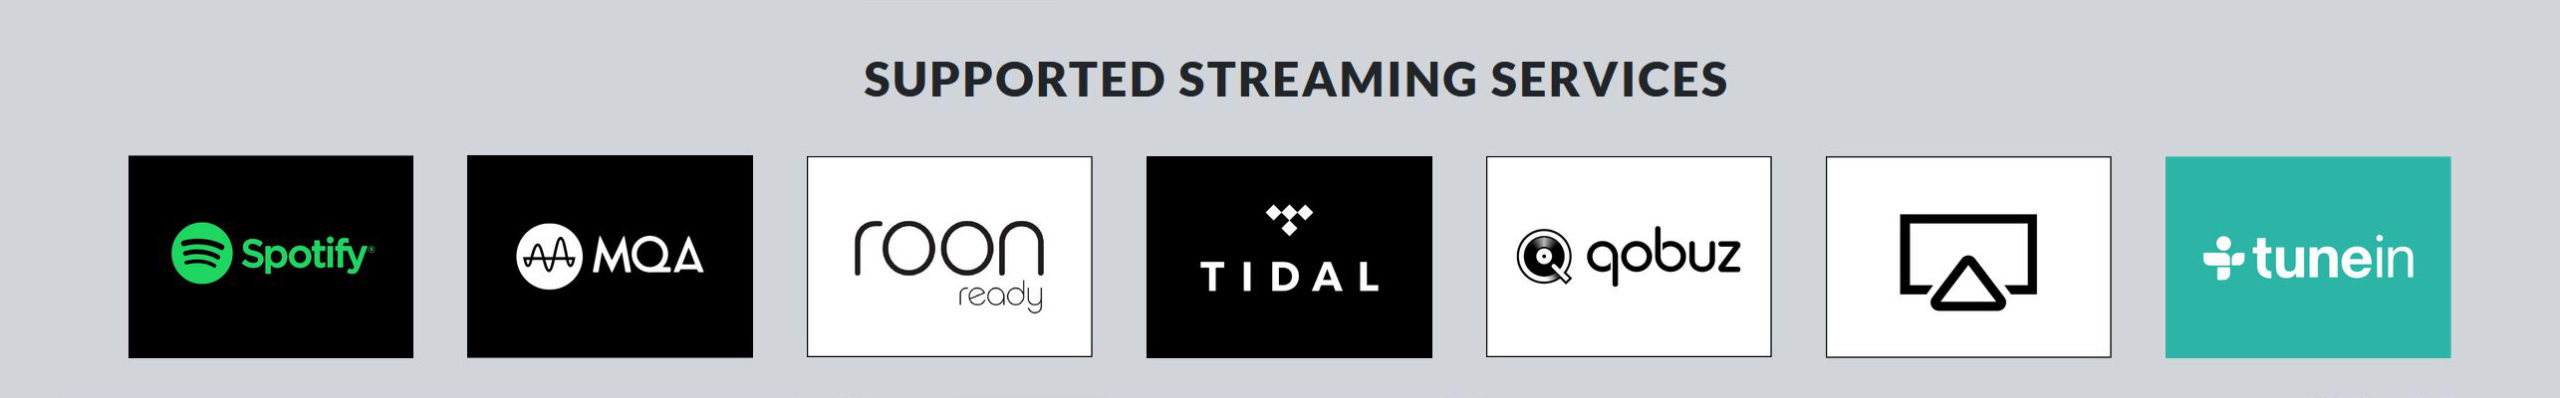 D2 Supported Streaming Services